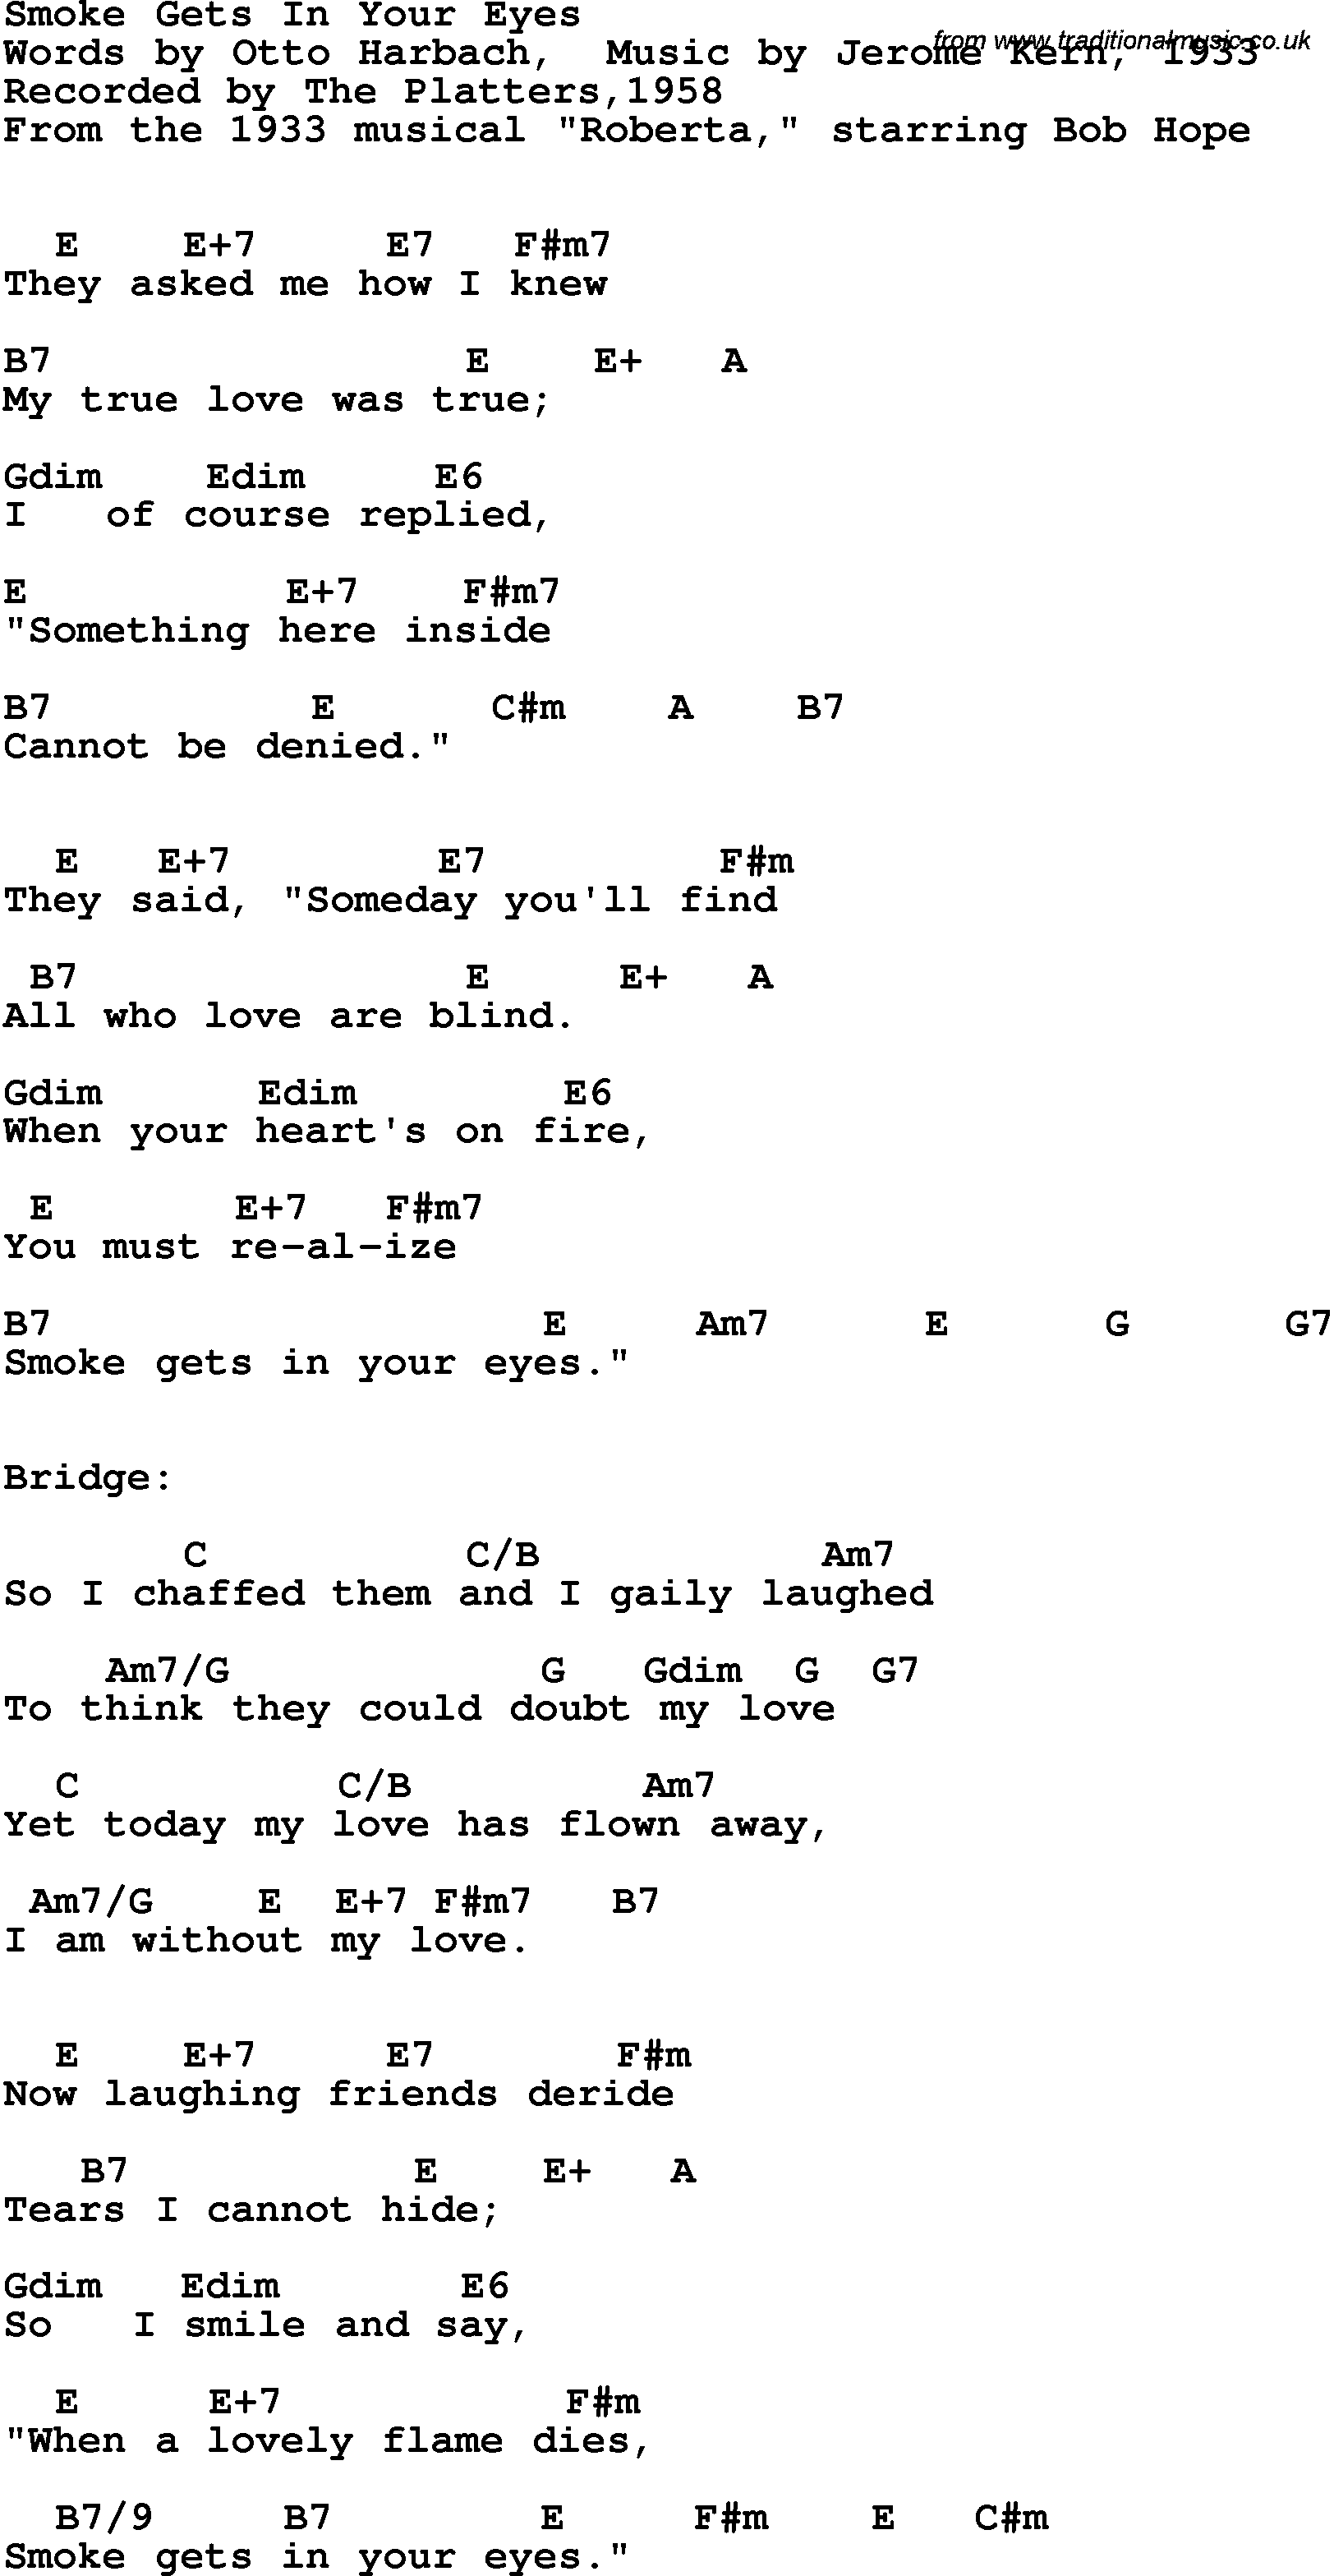 Song Lyrics with guitar chords for Smoke Gets In Your Eyes - The Platters, 1958